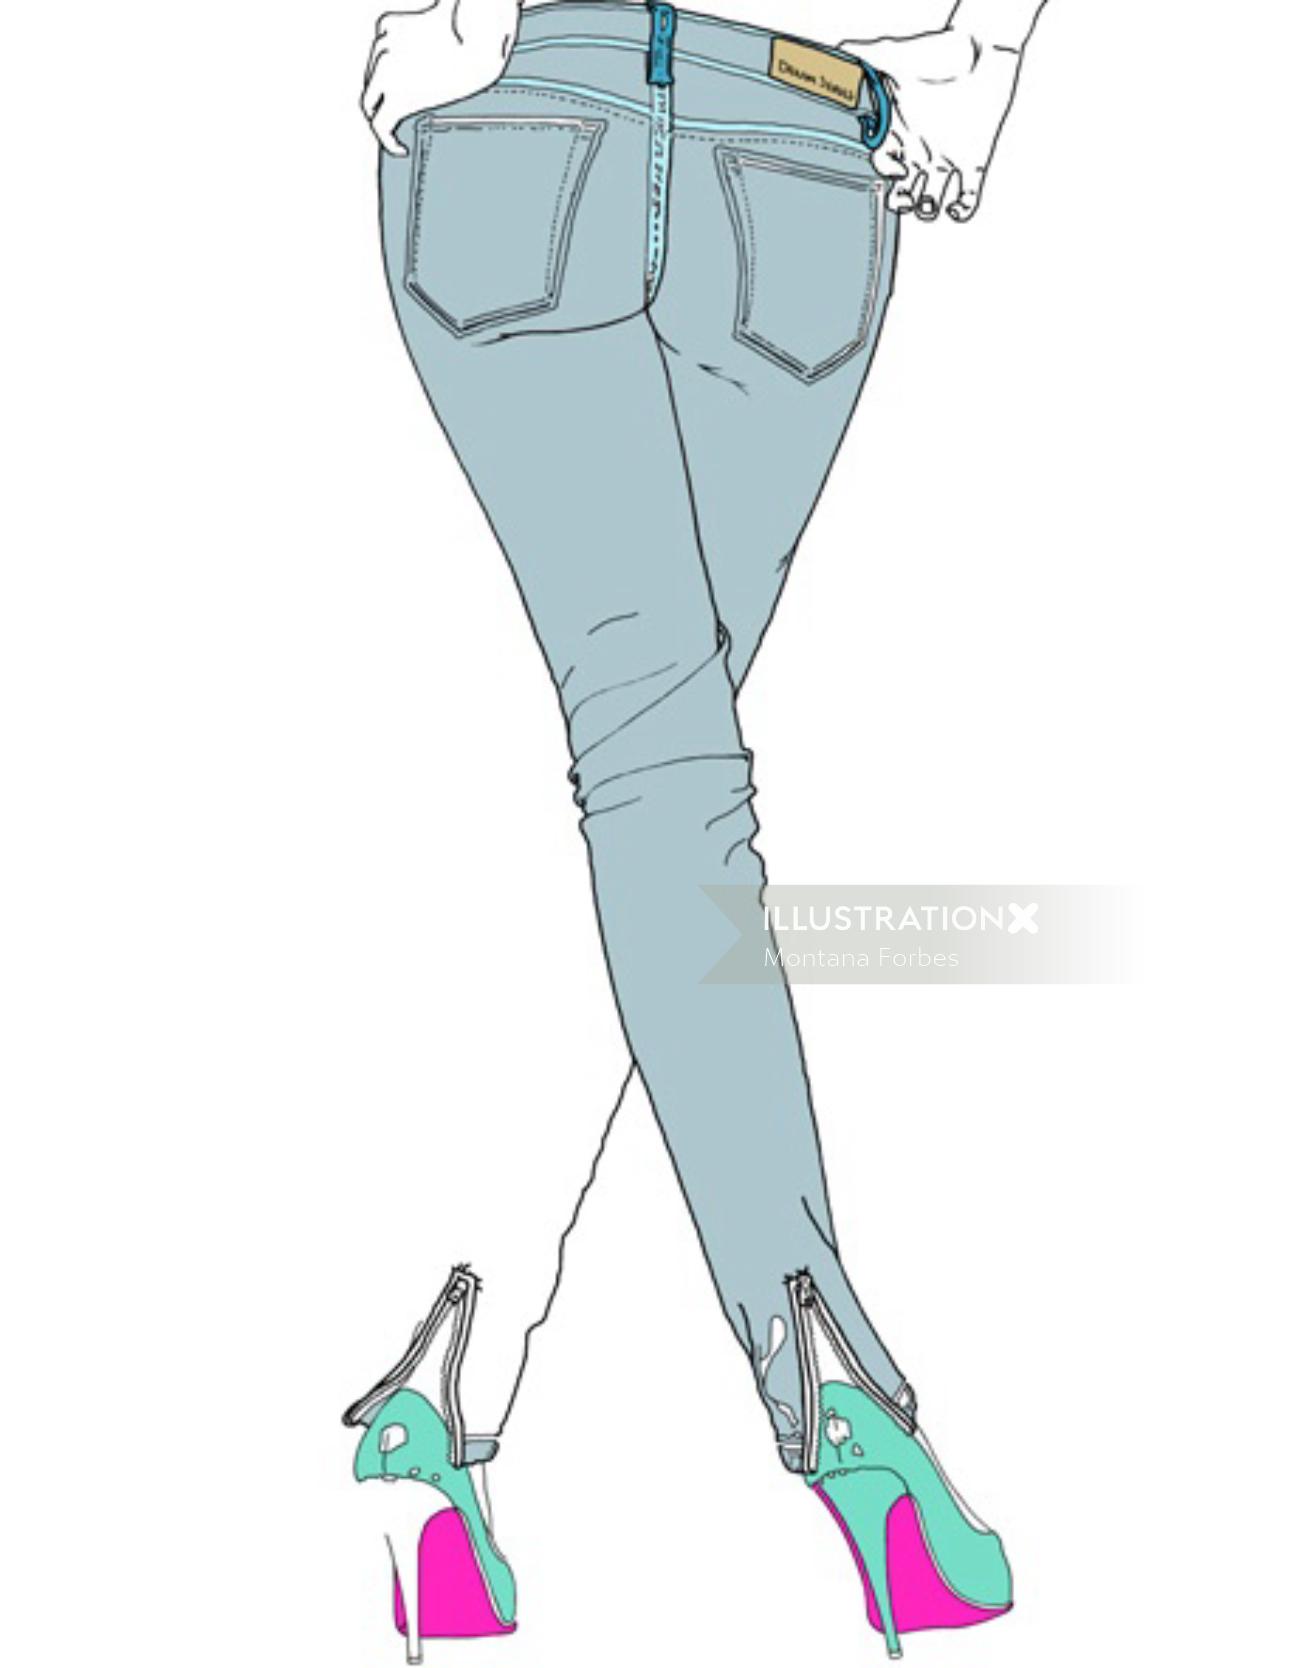 Jeans with high heels - fashion illustration